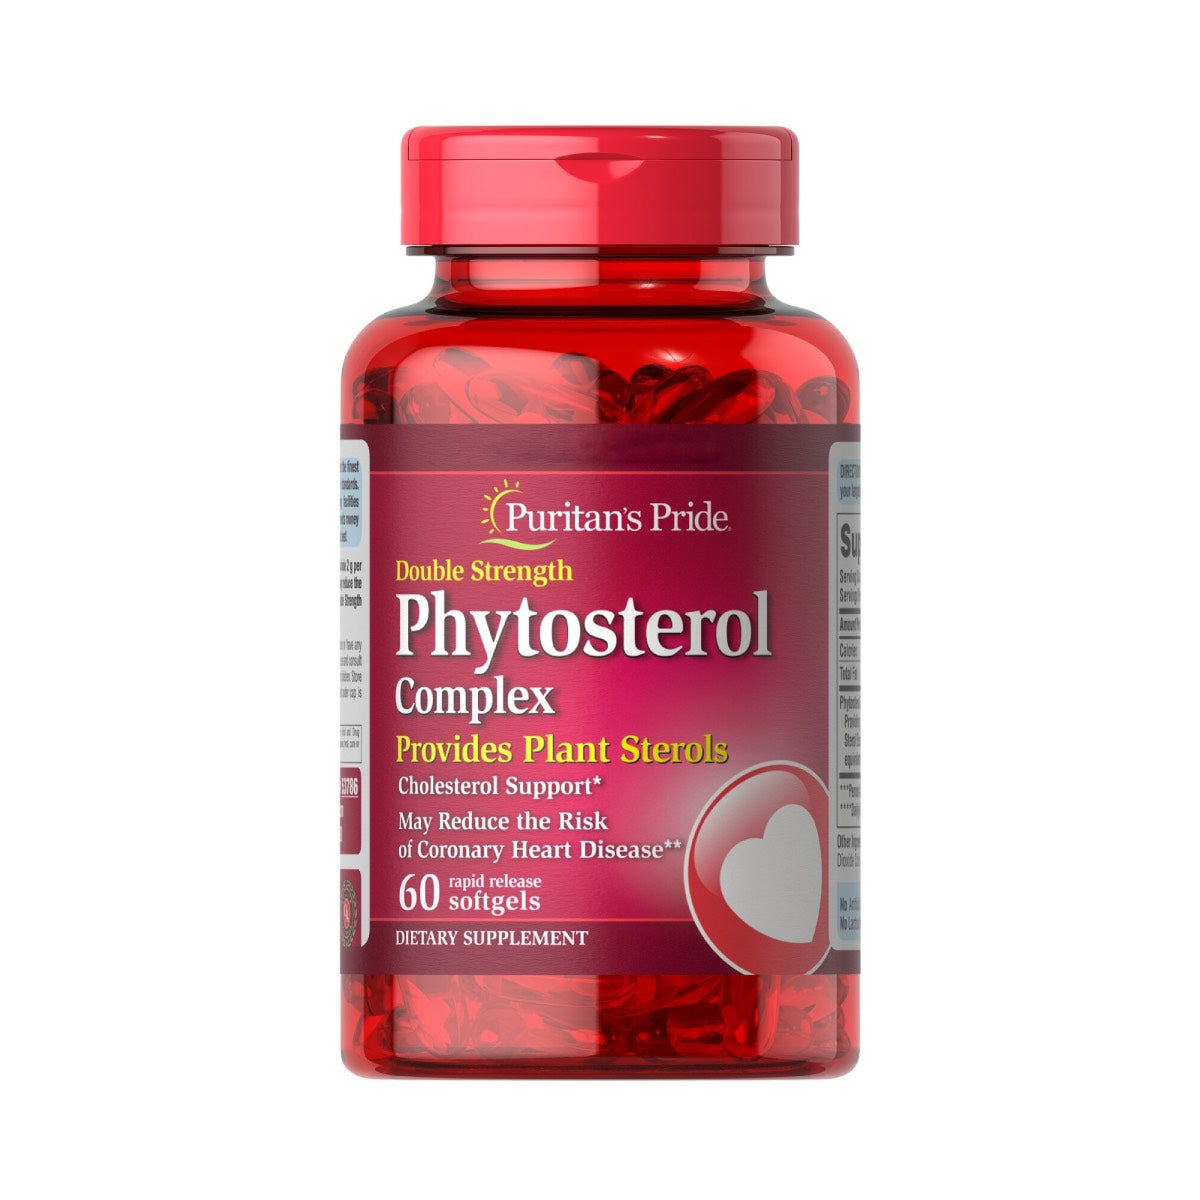 Puritan's Pride, Double Strength Phytosterol Complex 2,000 mg (per serving)